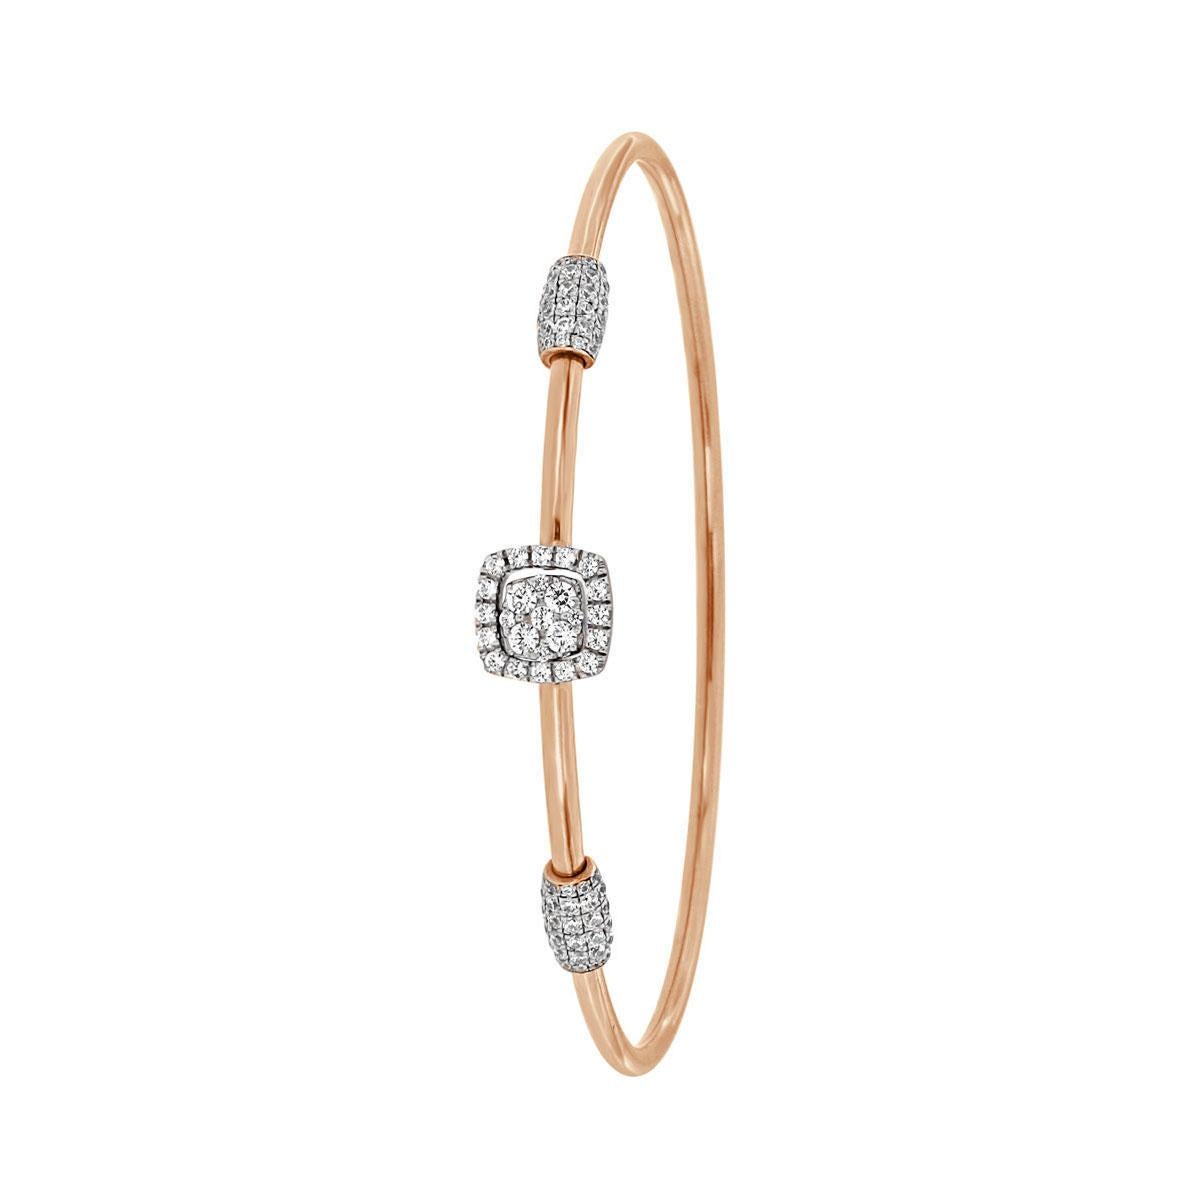 This fashionable flex bangle features Cushion brilliant diamonds micro-prong-set in a round halo. Experience the difference!

Product details: 

Center Gemstone Type: NATURAL DIAMOND
Center Gemstone Color: WHITE
Center Gemstone Shape: ROUND
Center